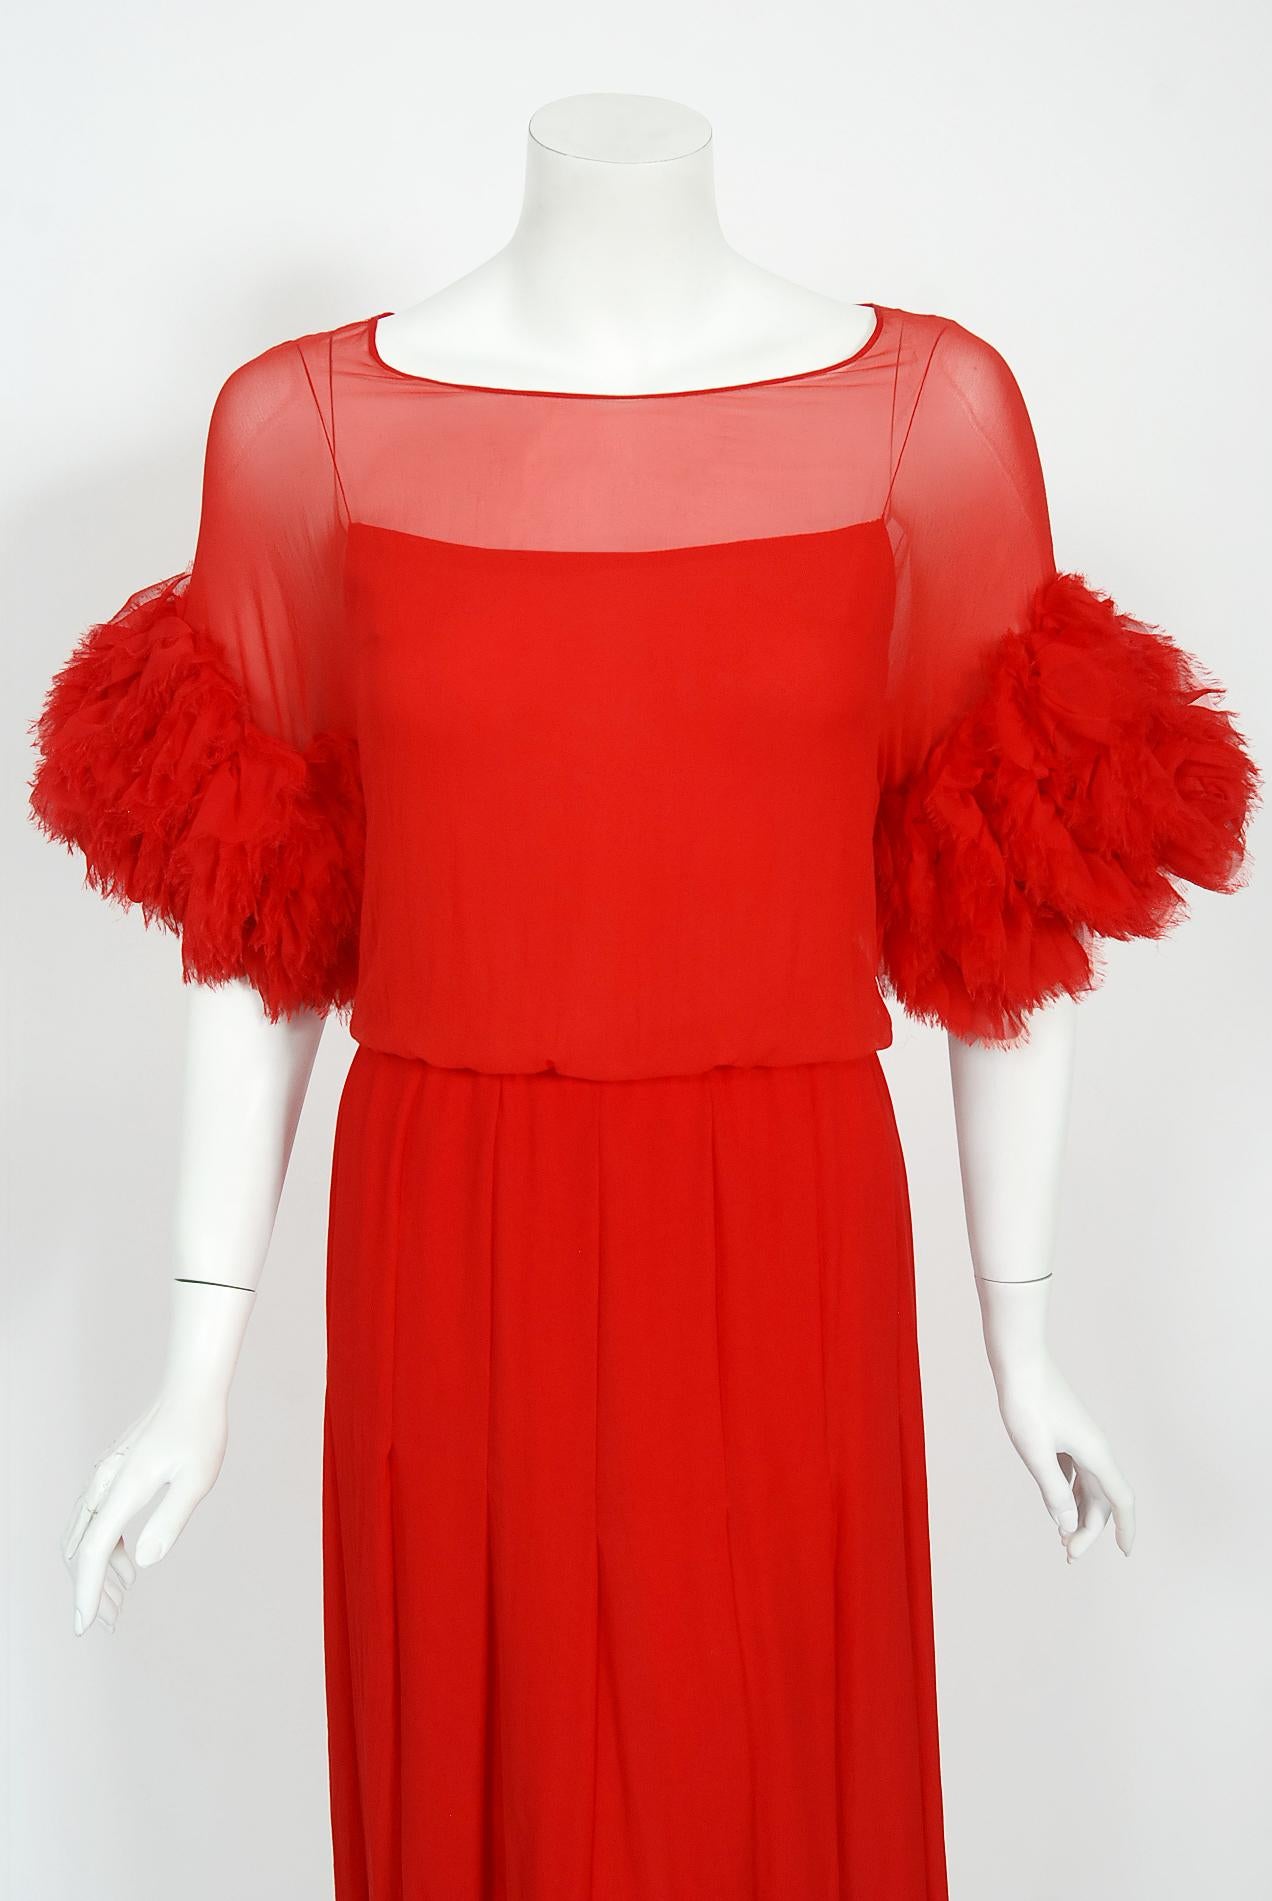 Vintage 1984 Chanel by Karl Lagerfeld Runway Red Silk Chiffon Ruffle-Sleeve Gown 1